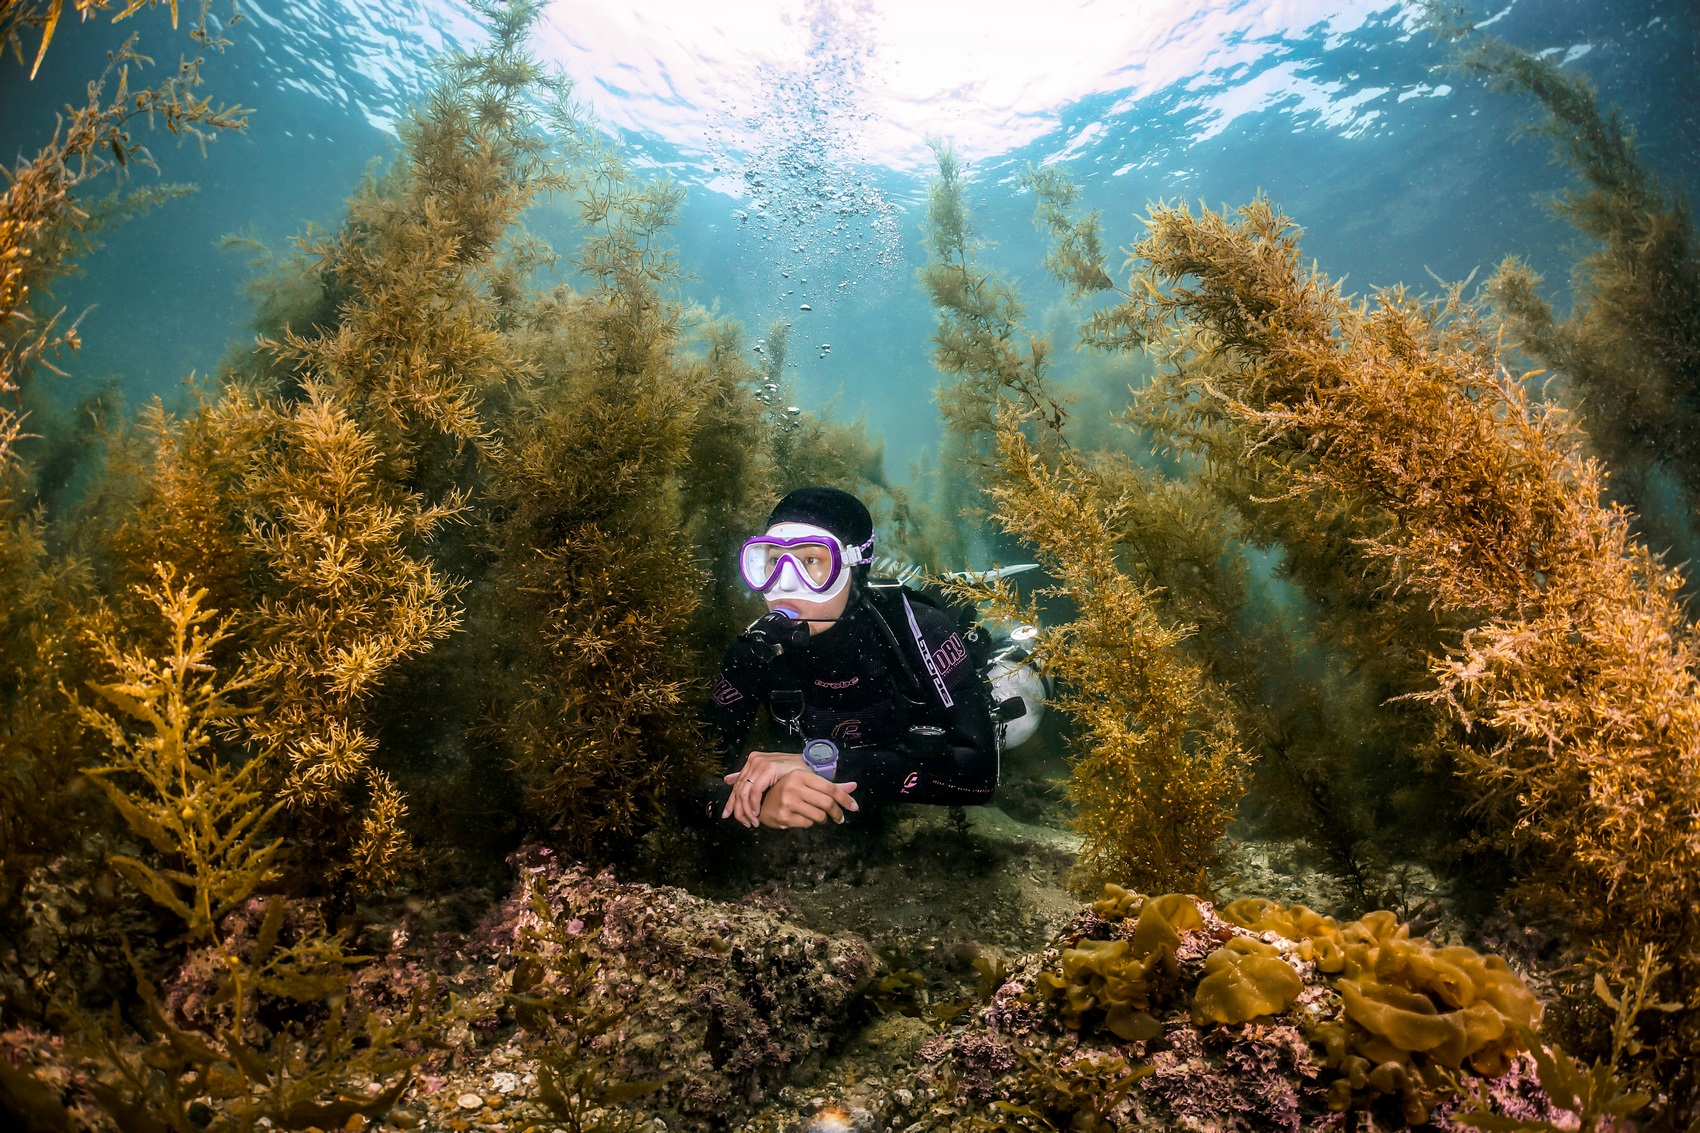 "Adventurer", first runner-up of the Standard & Wide Angle Category in the Open Group Digital Photo Competition at Hong Kong Underwater Photo and Video Competition 2023, taken by Chan Ho-yeung off Lung Ha Wan. Photo: GovHK.